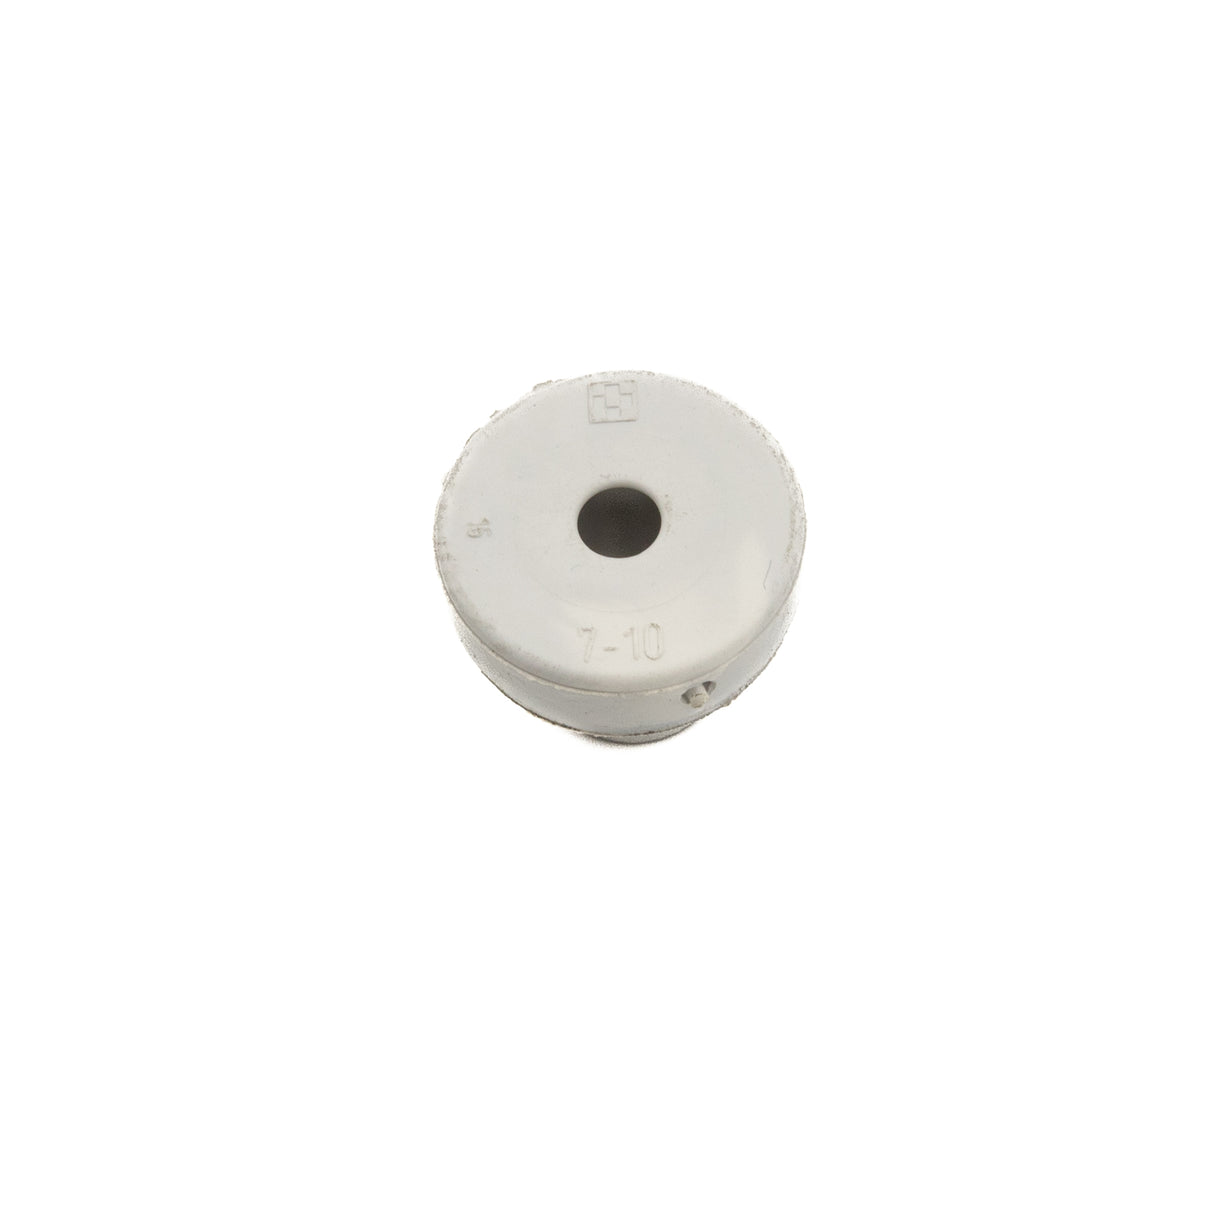 Boxco BC-RG-PG21 Rubber Cable Gland Grommet 29 mm Hole Ivory - PHOTO 2